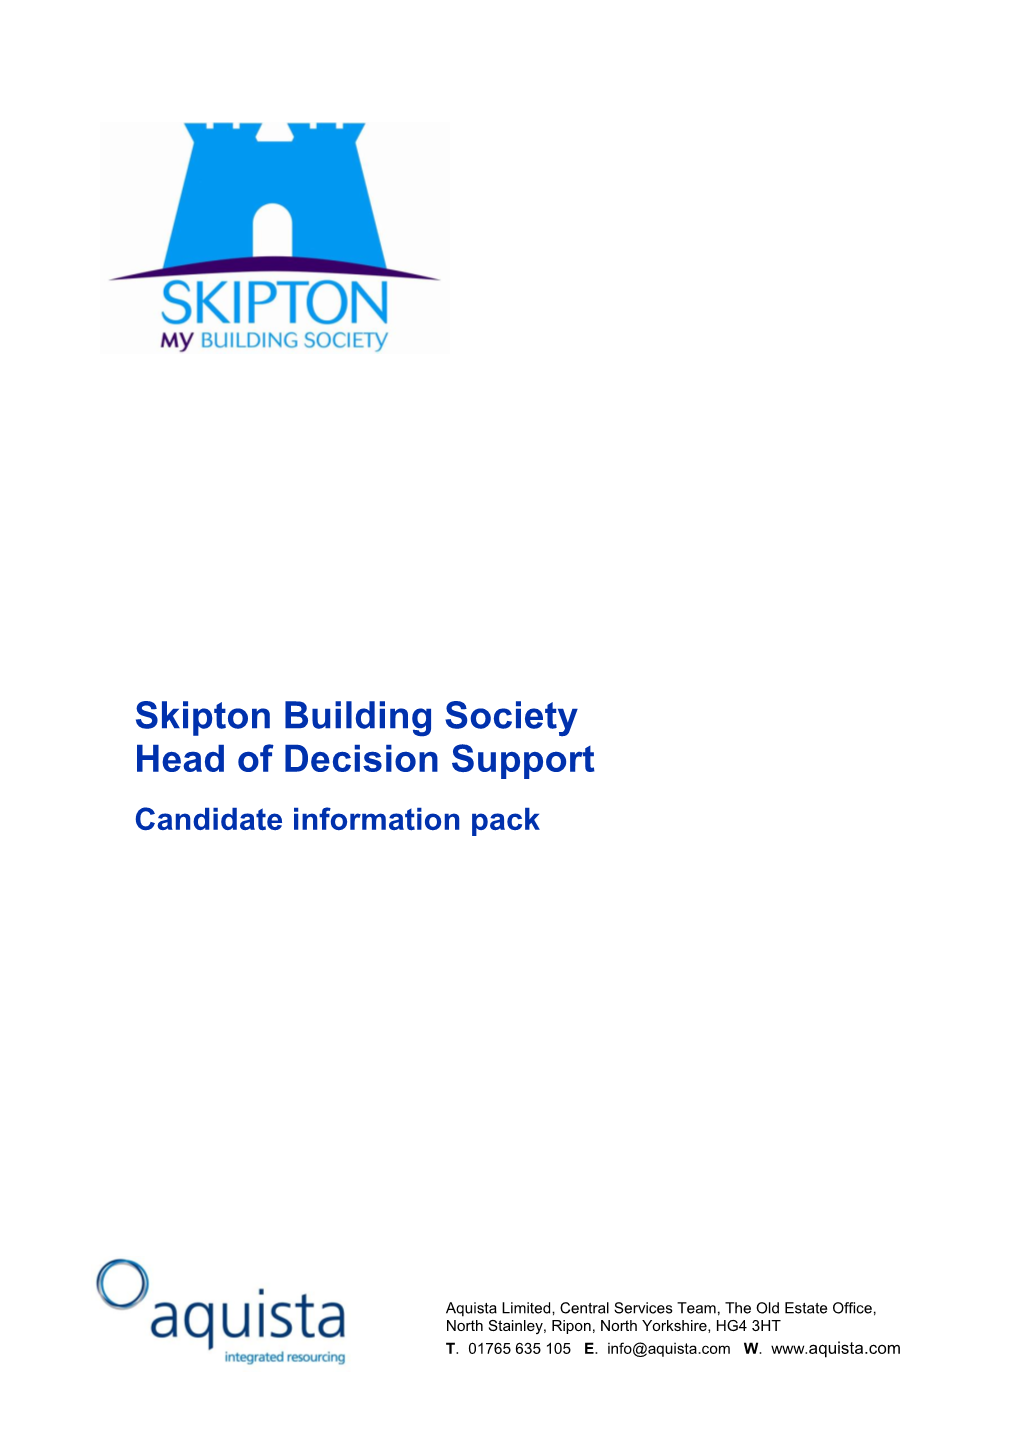 Skipton Building Society Head of Decision Support